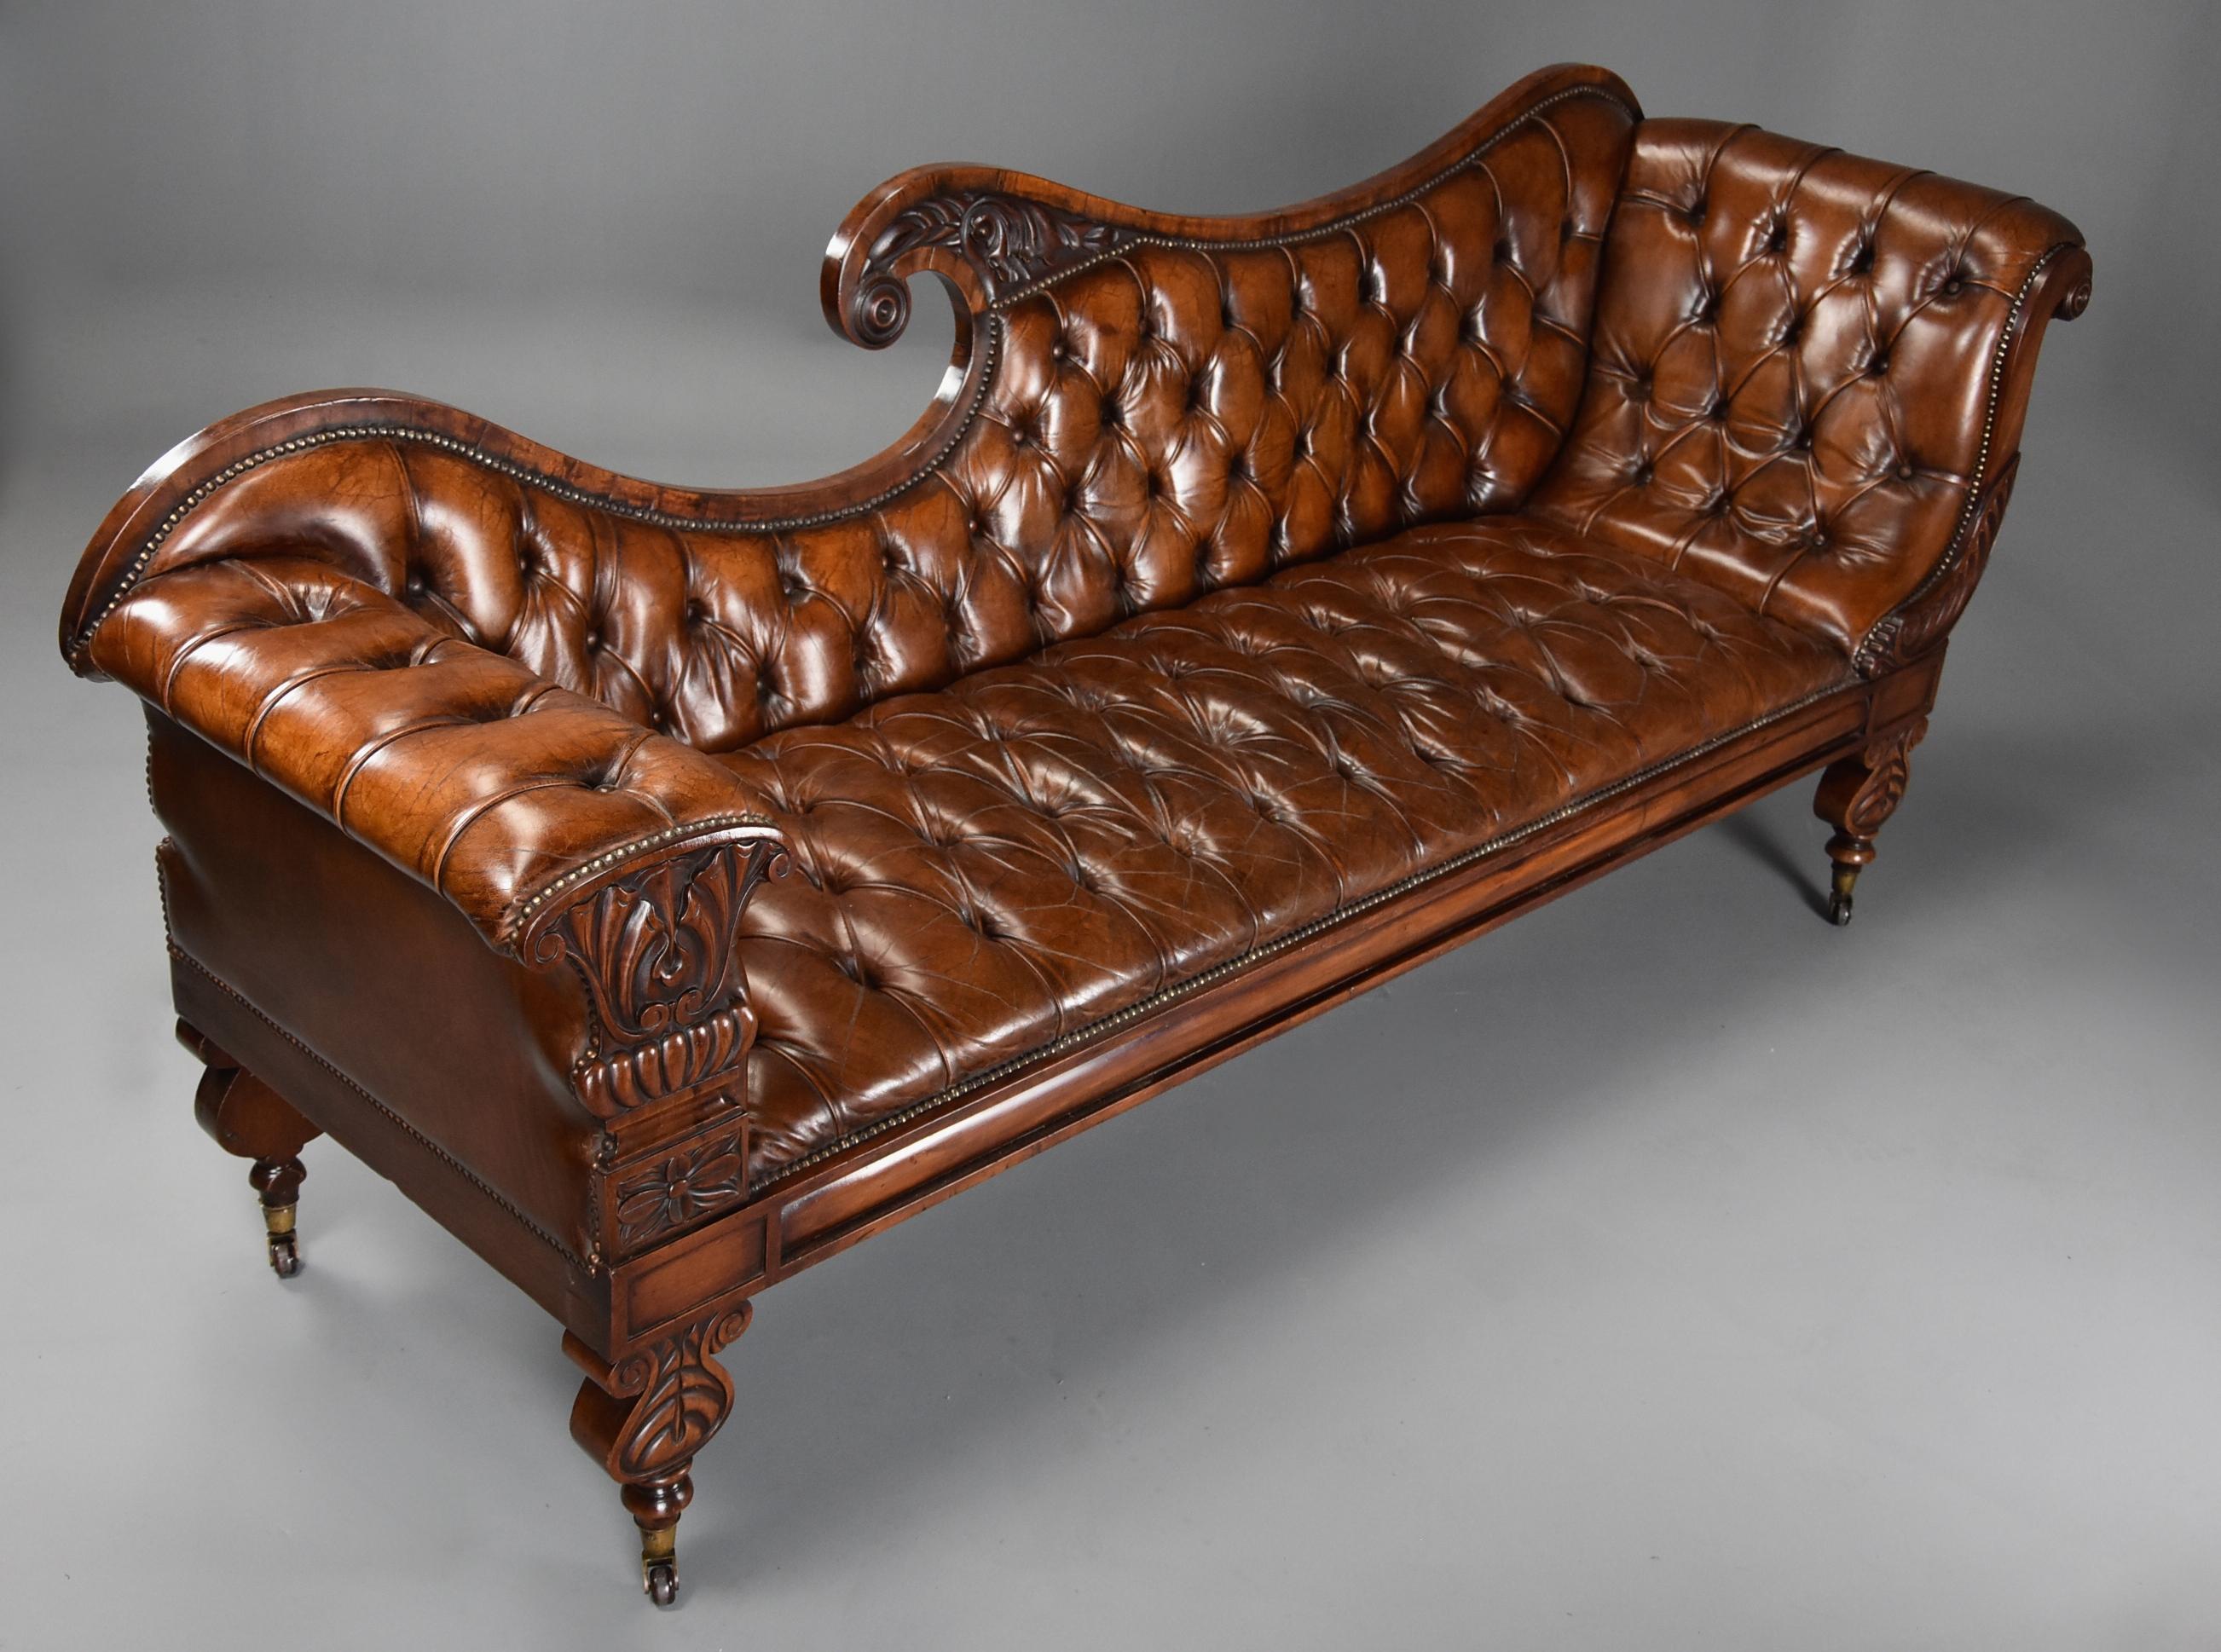 Superb Late Regency/William IV Mahogany Deep Buttoned Brown Leather Sofa In Good Condition For Sale In Suffolk, GB